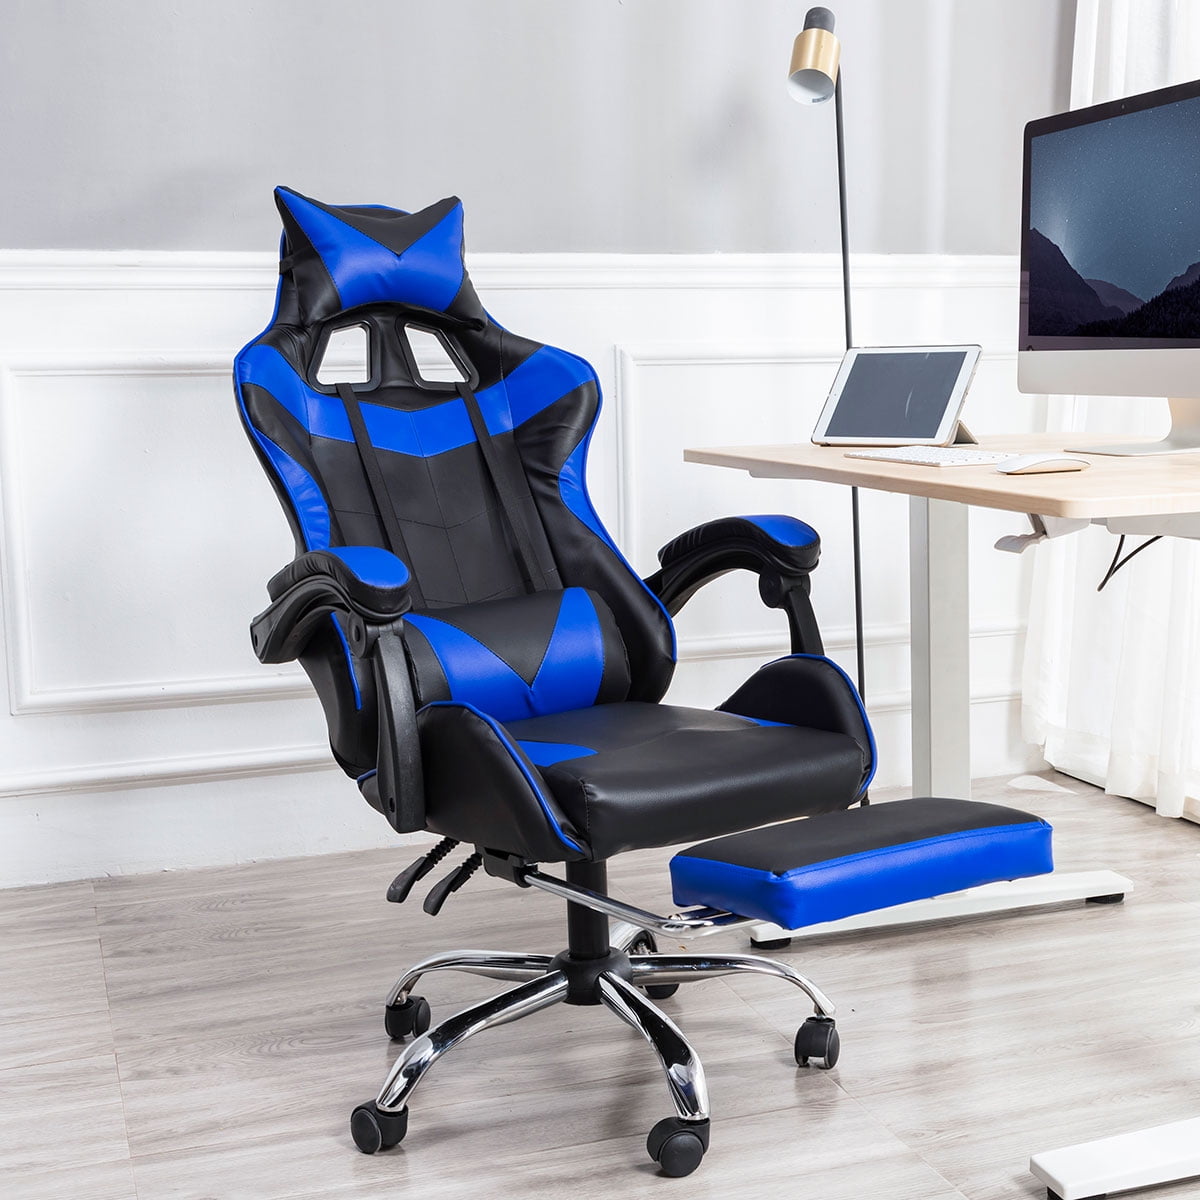 Blue Racing Style Gaming Chair - Ergonomic E-Sports Computer Chair